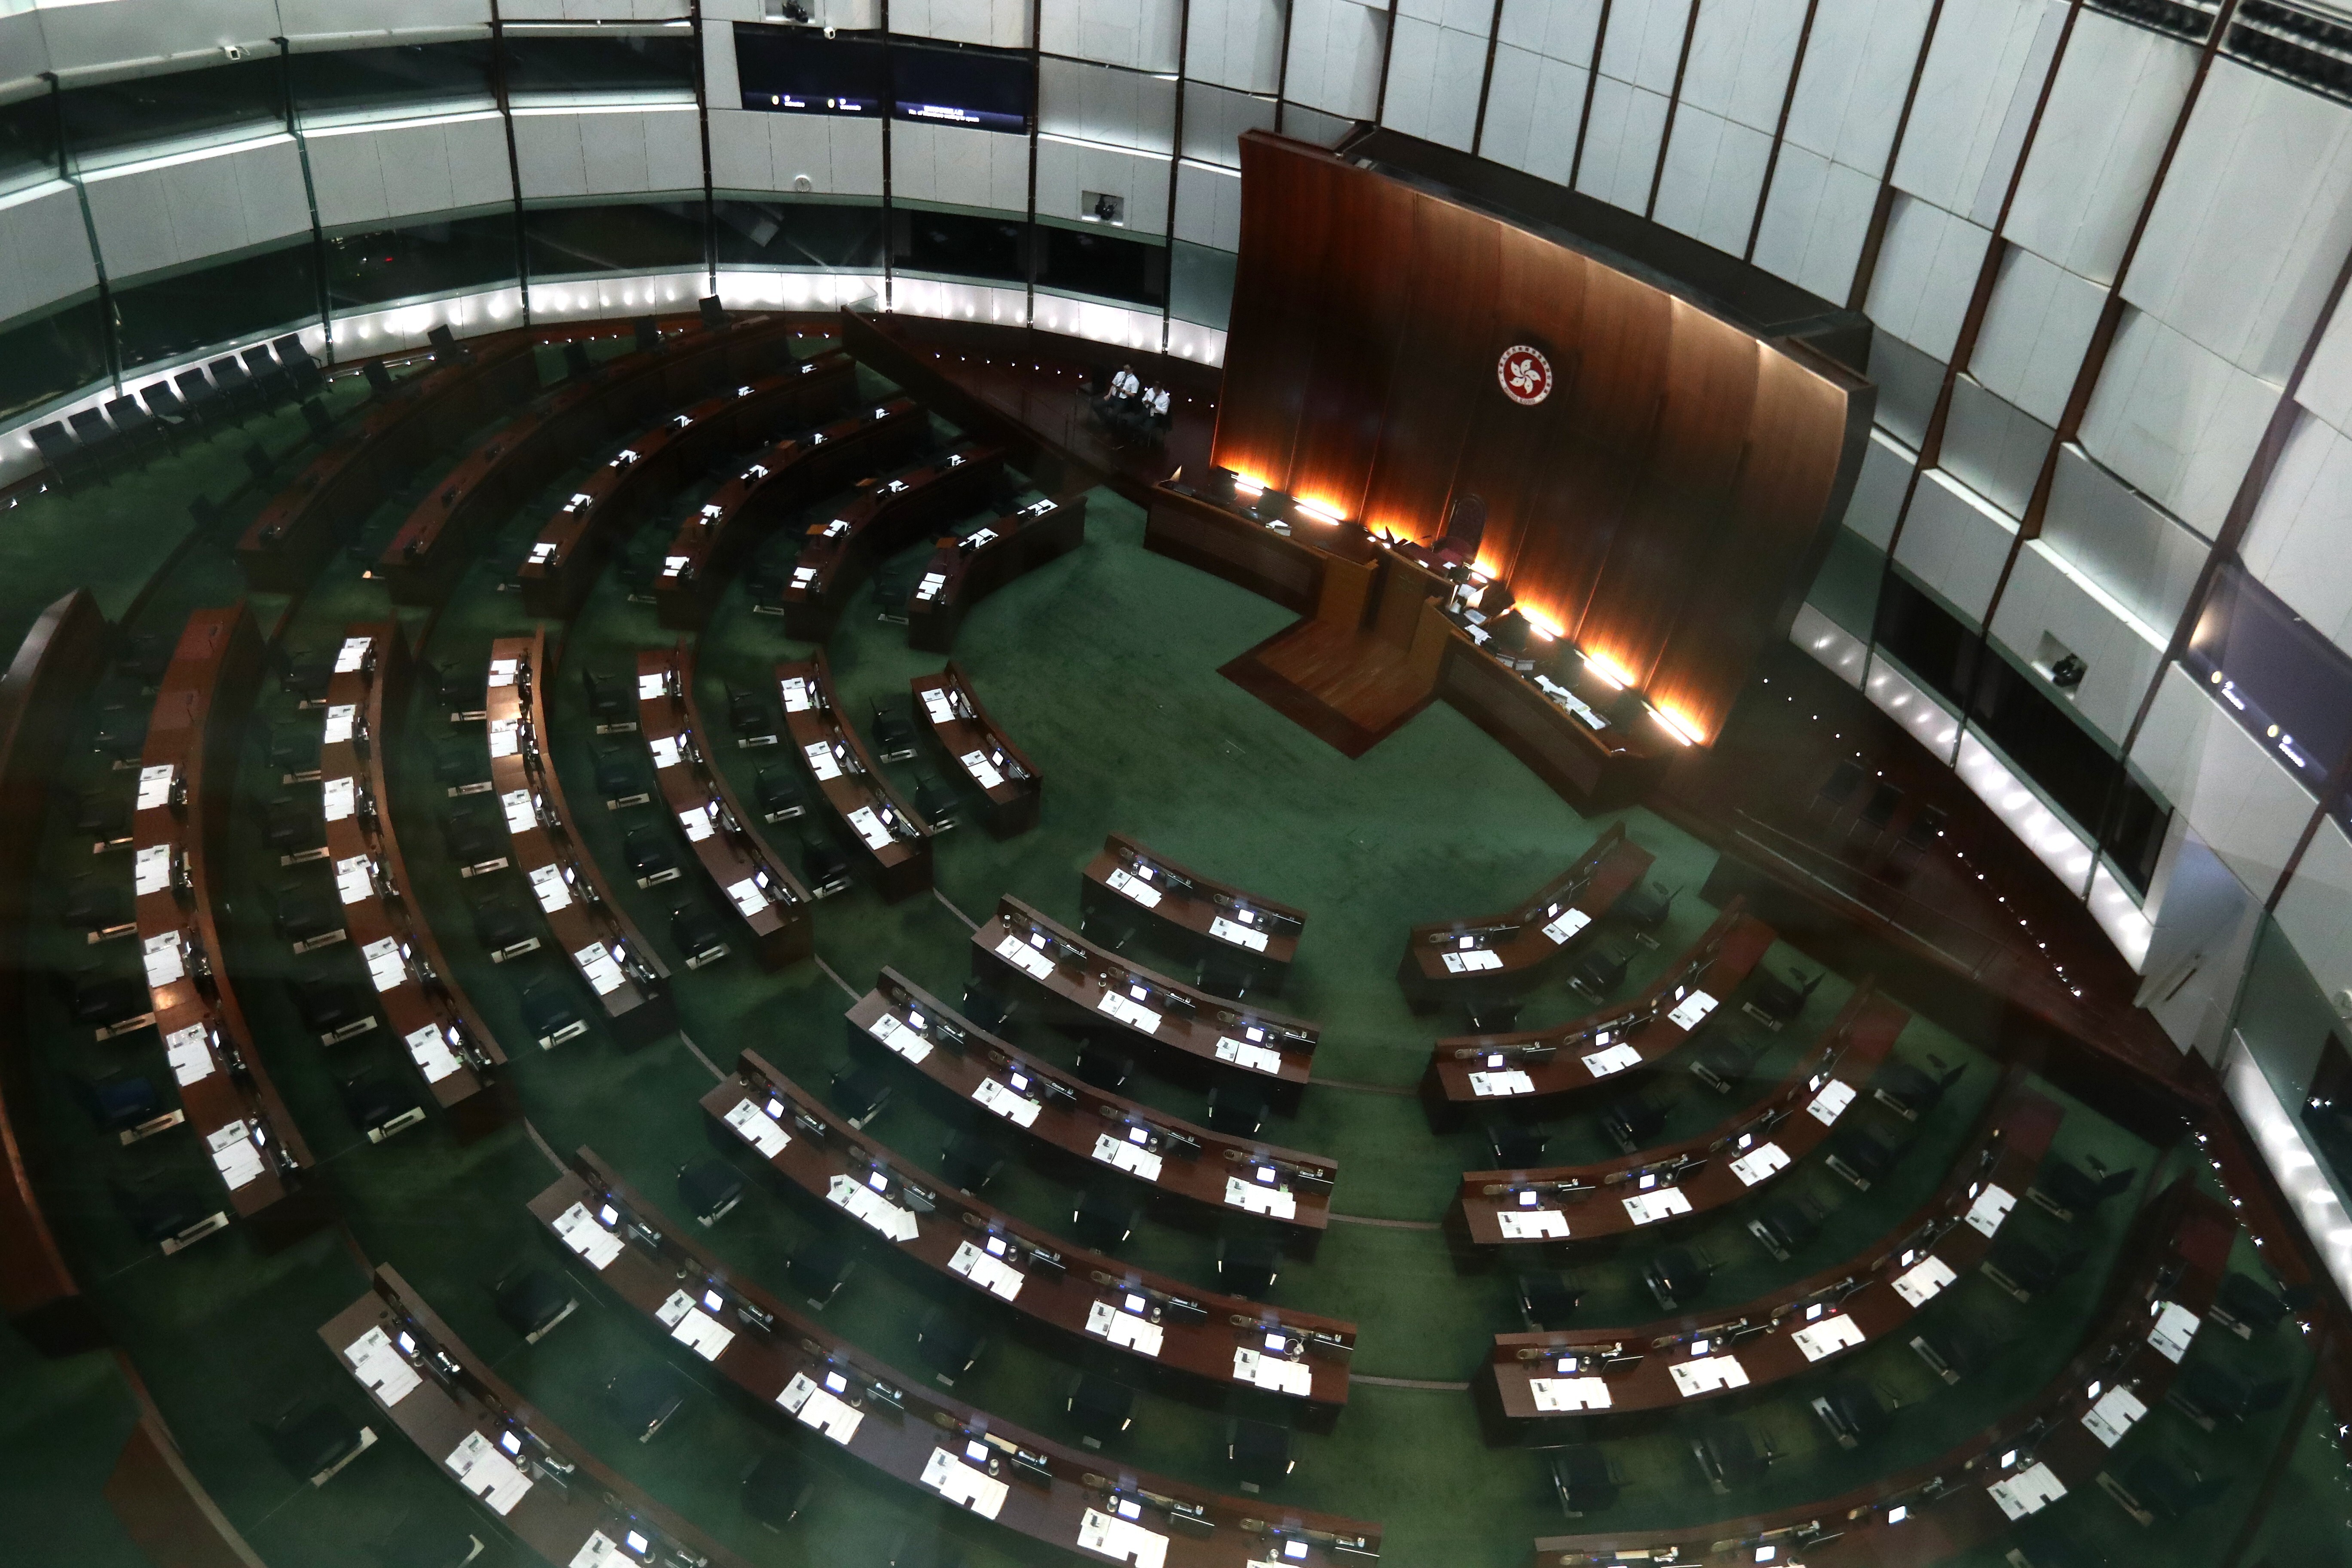 The empty Legco chamber. The House Committee in Legco scrutinises bills before they are put to a vote. Photo: Nora Tam